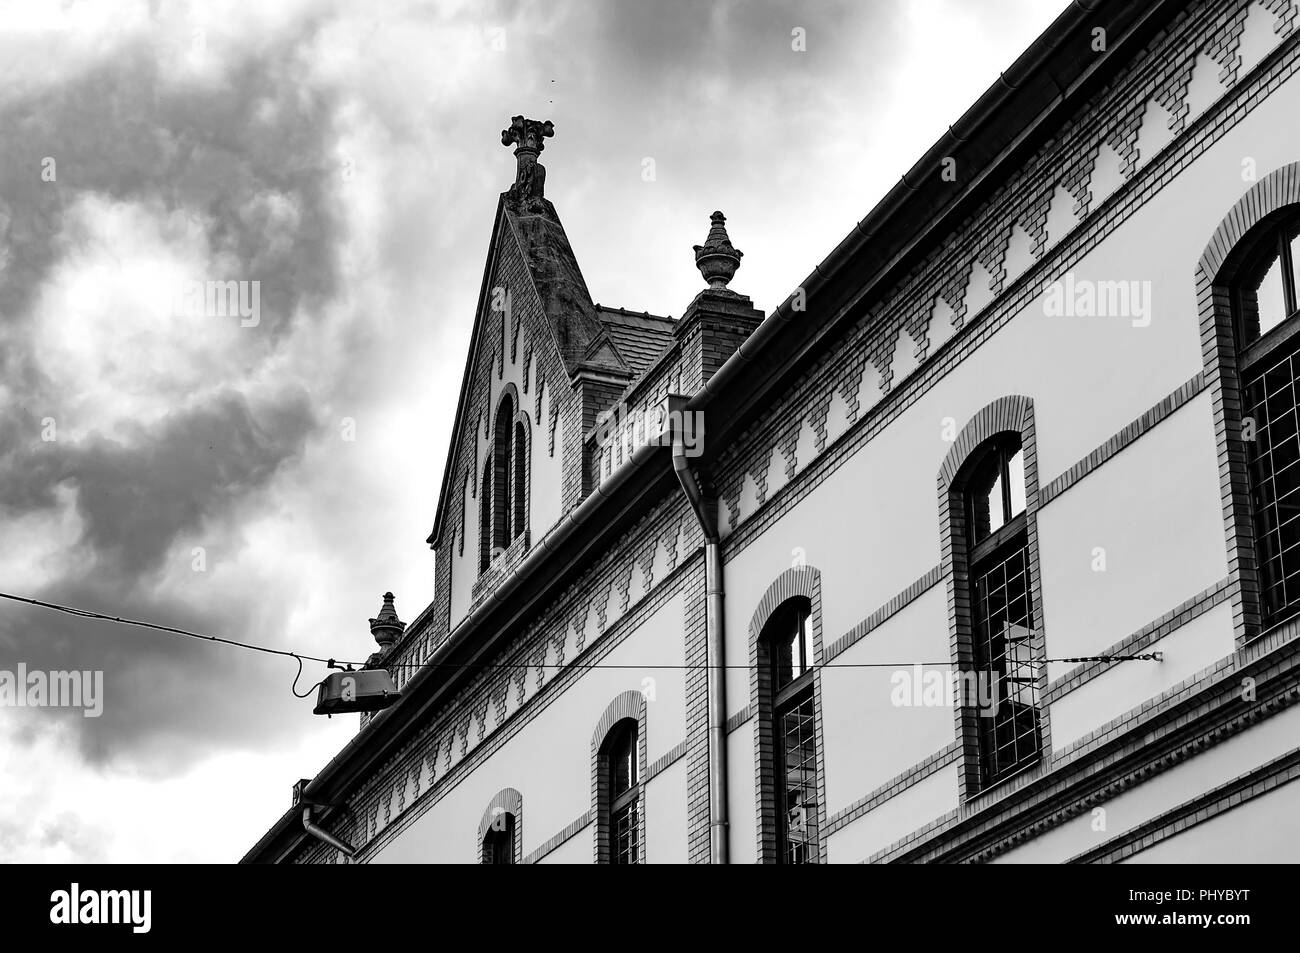 Black and white photo of the historic architecture in Eger, Hungary, Europe on a cloudy, stormy day. Stock Photo